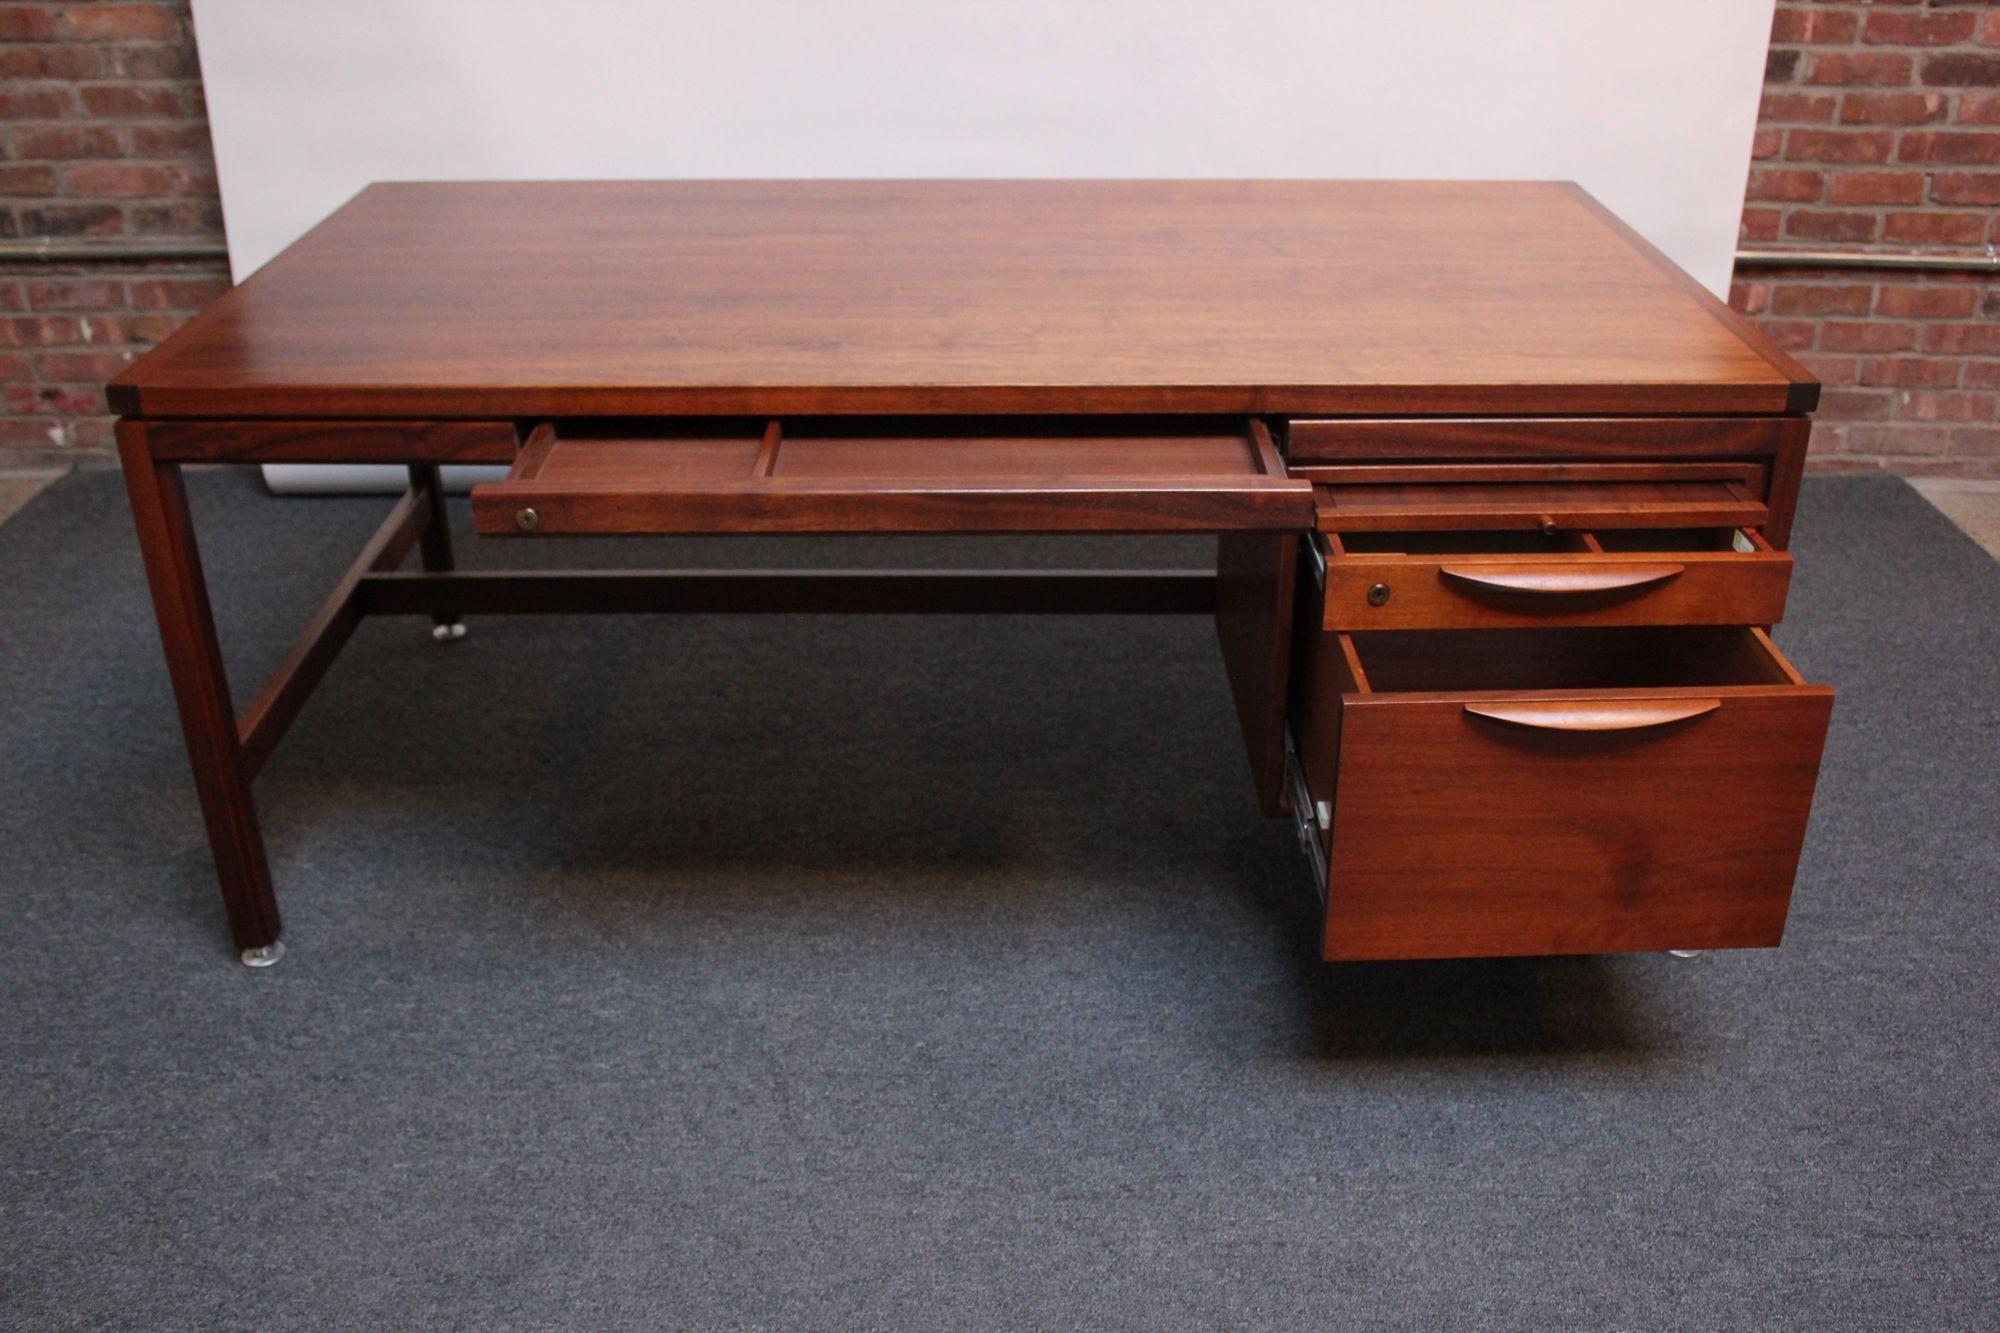 Mid-Century American Modern single pedestal executive desk in walnut by Jens Risom (ca. 1960, USA).
Features a pull-out writing surface with glass top above a drawer with a laminate surface flanked by a solid walnut divider atop a corresponding